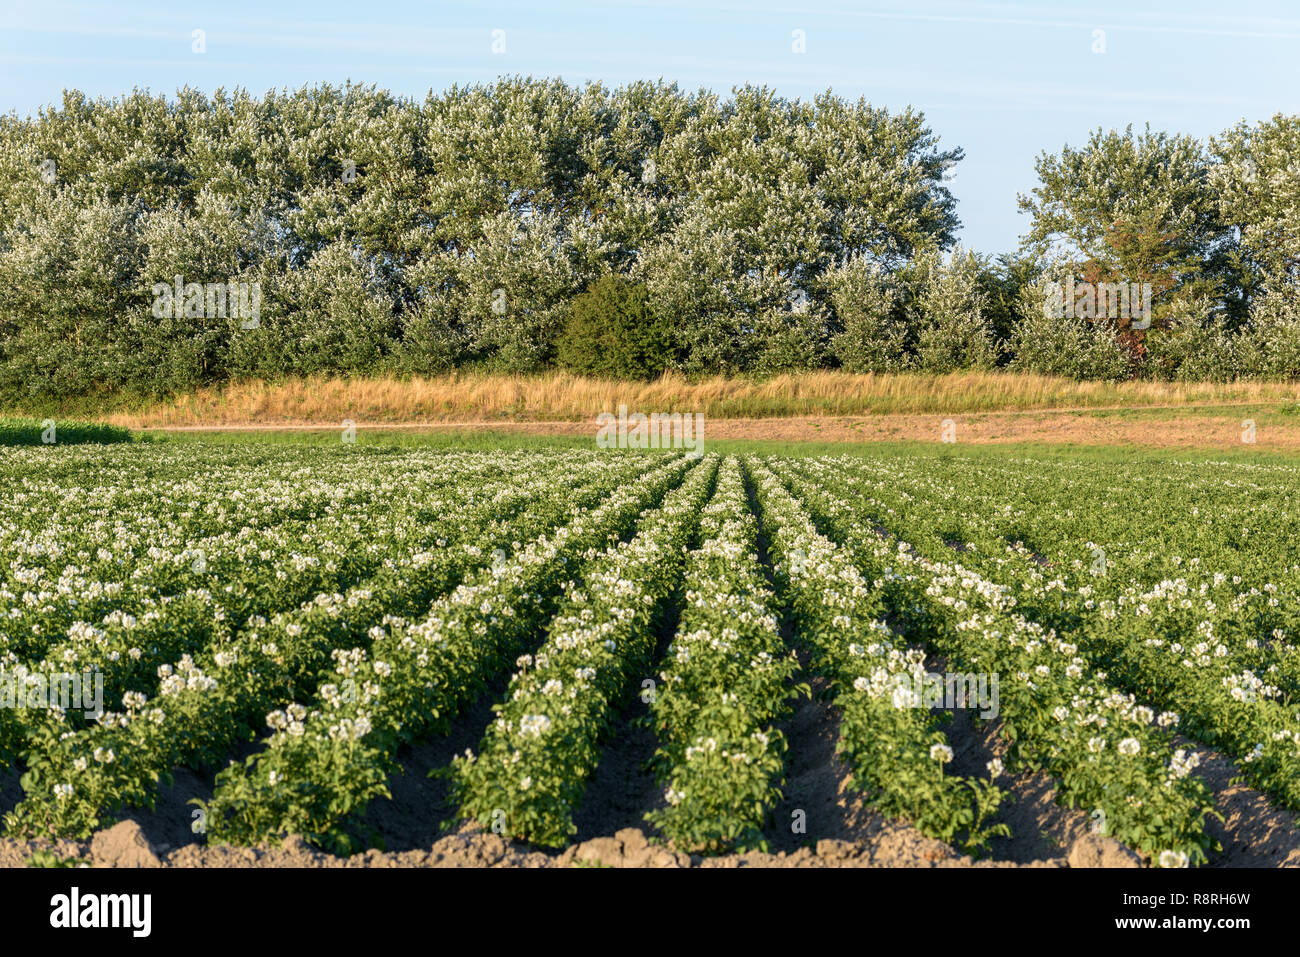 Farmland with lush flowering potato plants (solanum tuberosum) growing in rows during summer. There are trees in the background and blue sky above. Stock Photo